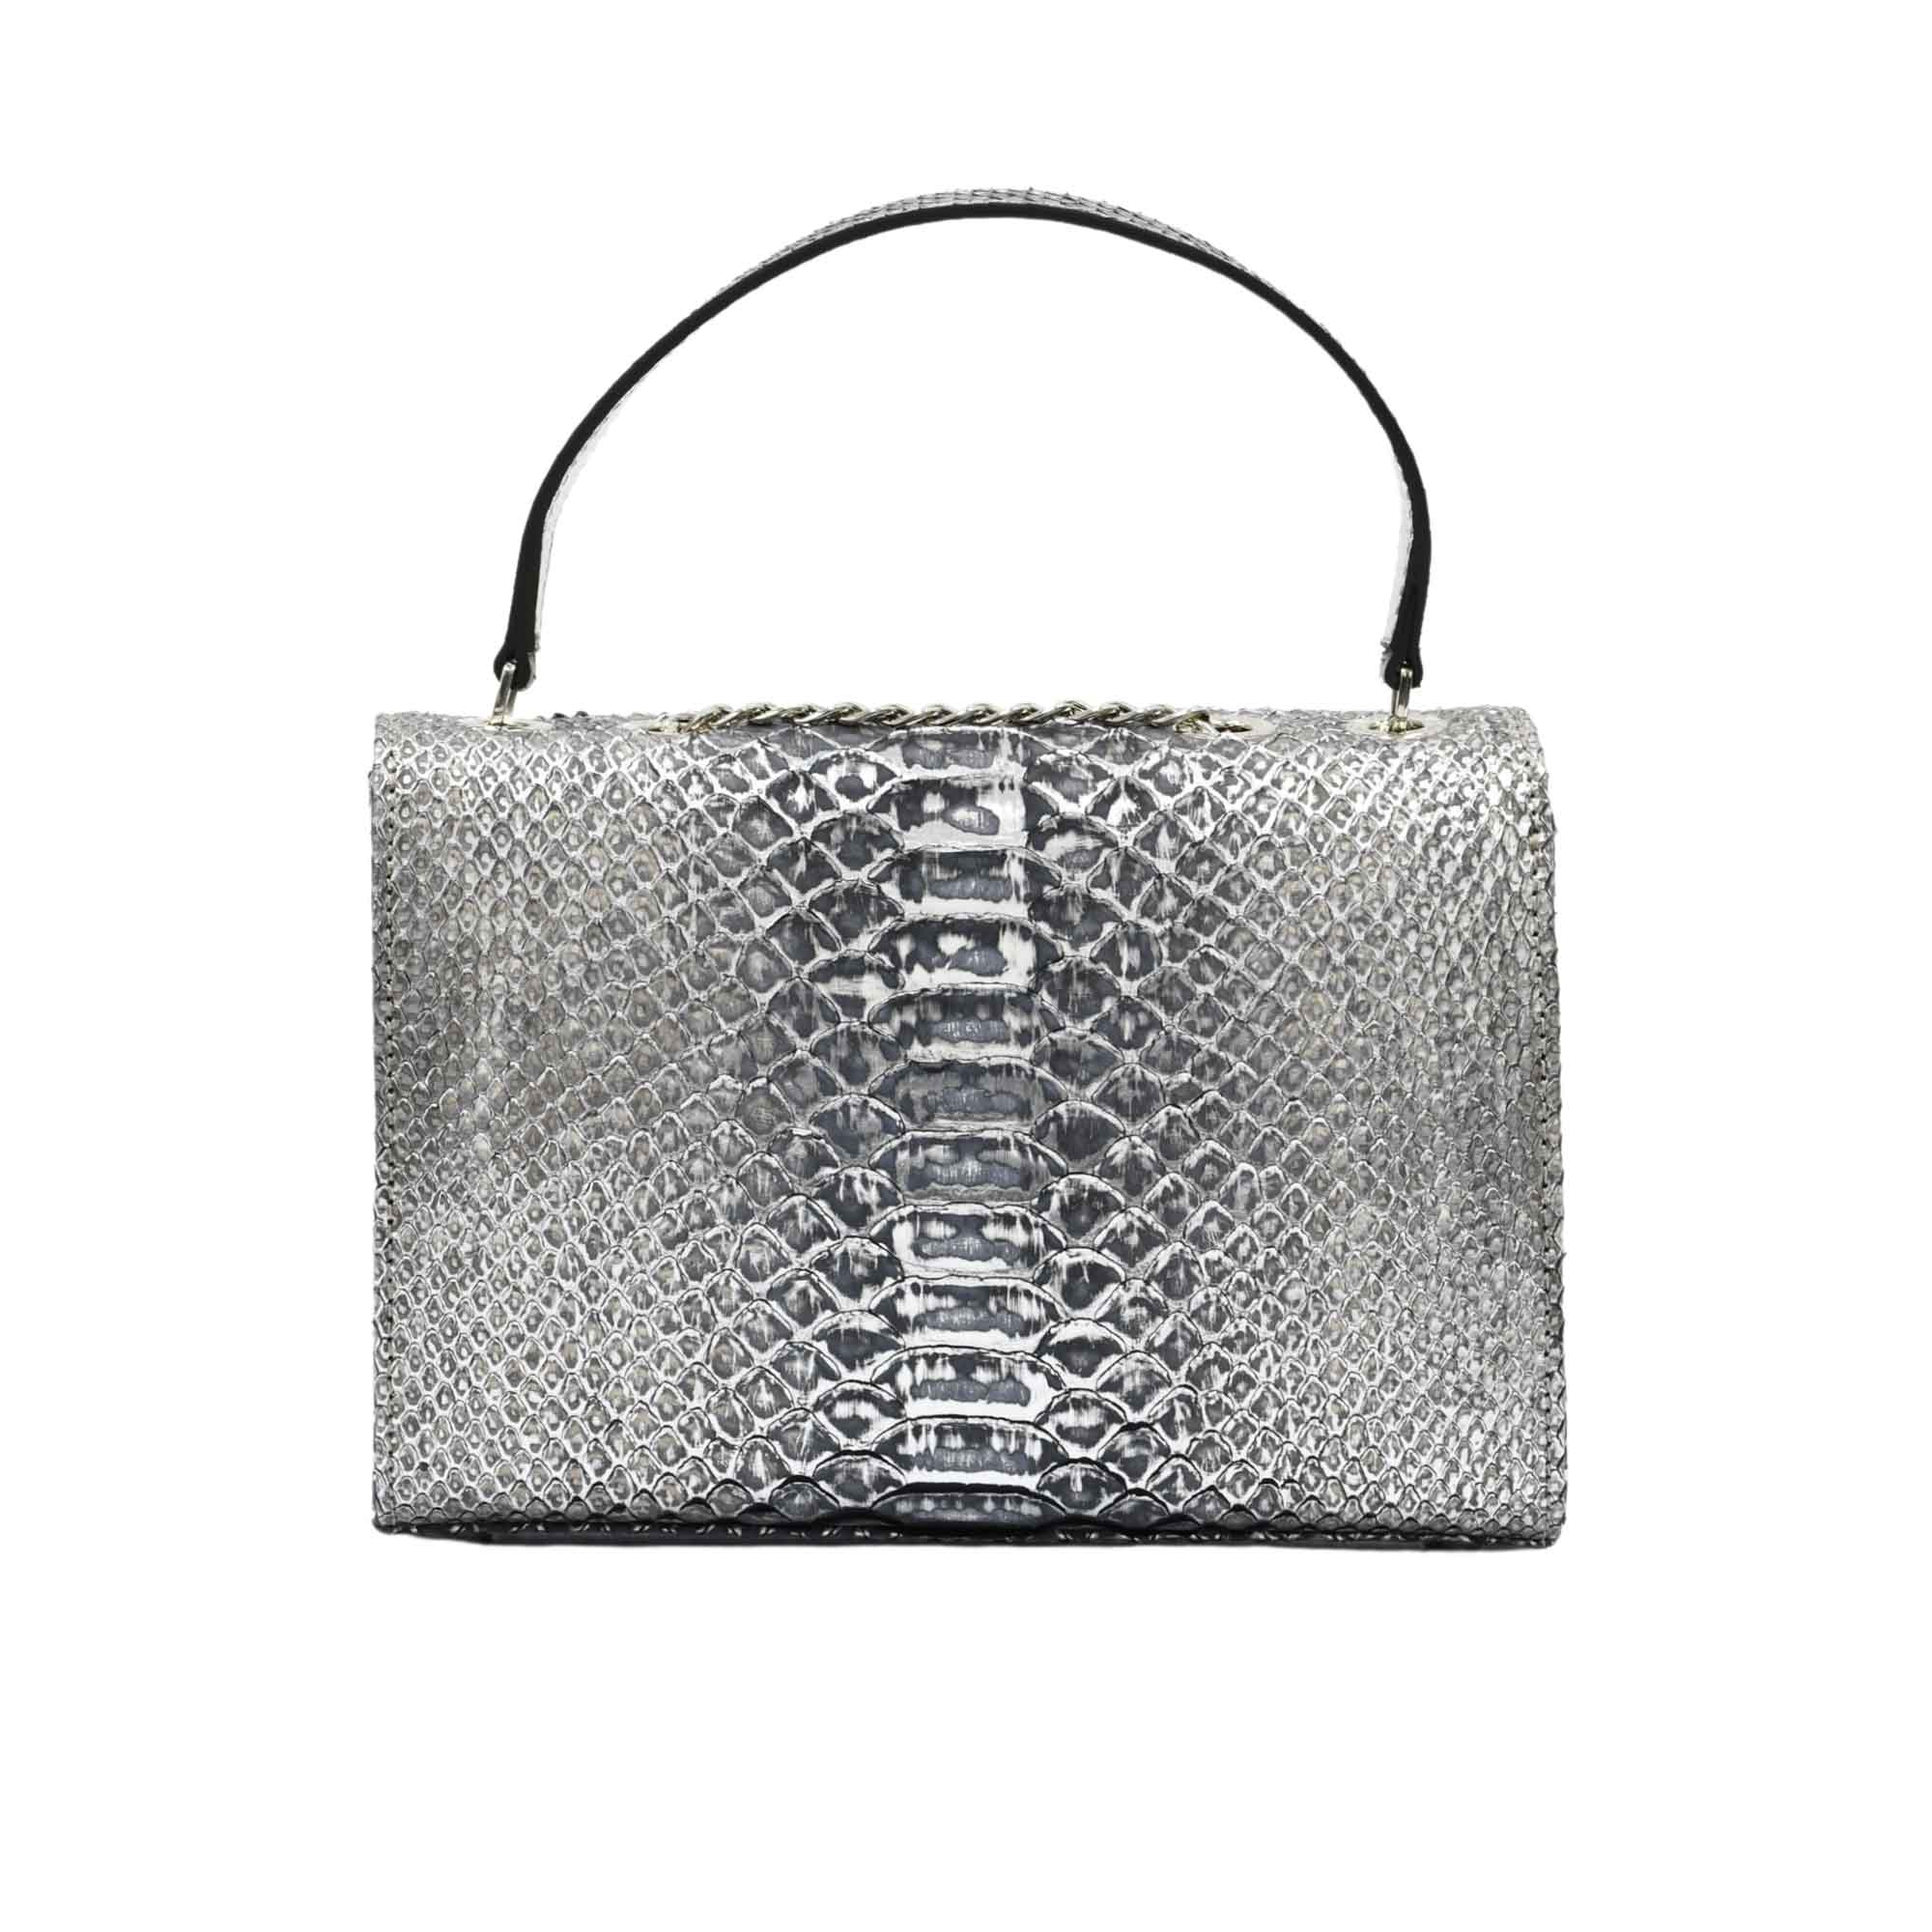 Anthony Group Women's Chagall Python Hand Bag